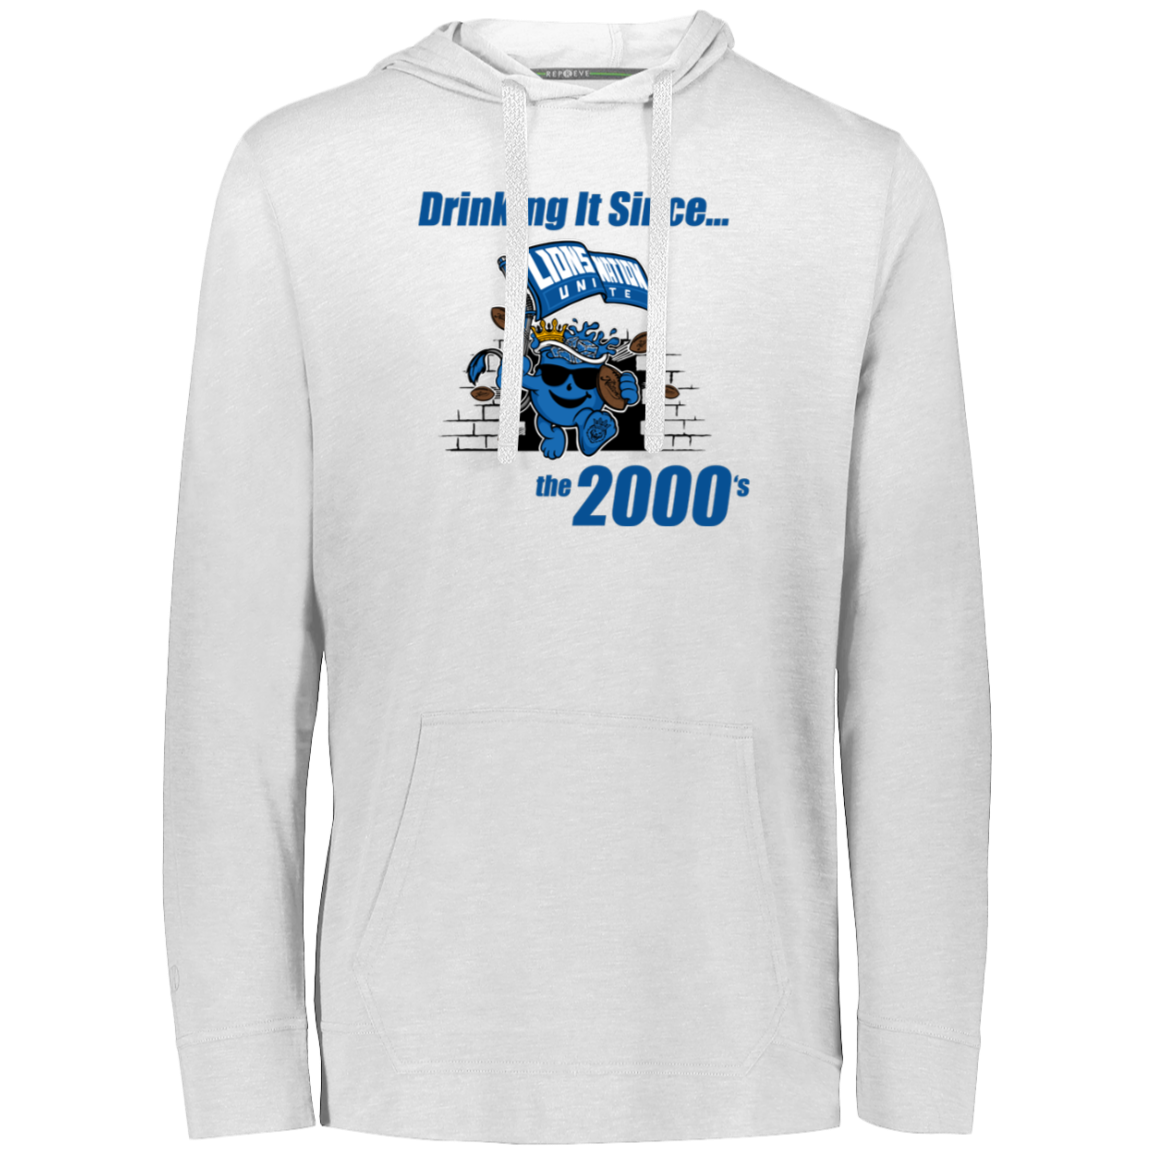 Drinking It Since the 2000's Men's T-Shirt Hoodie